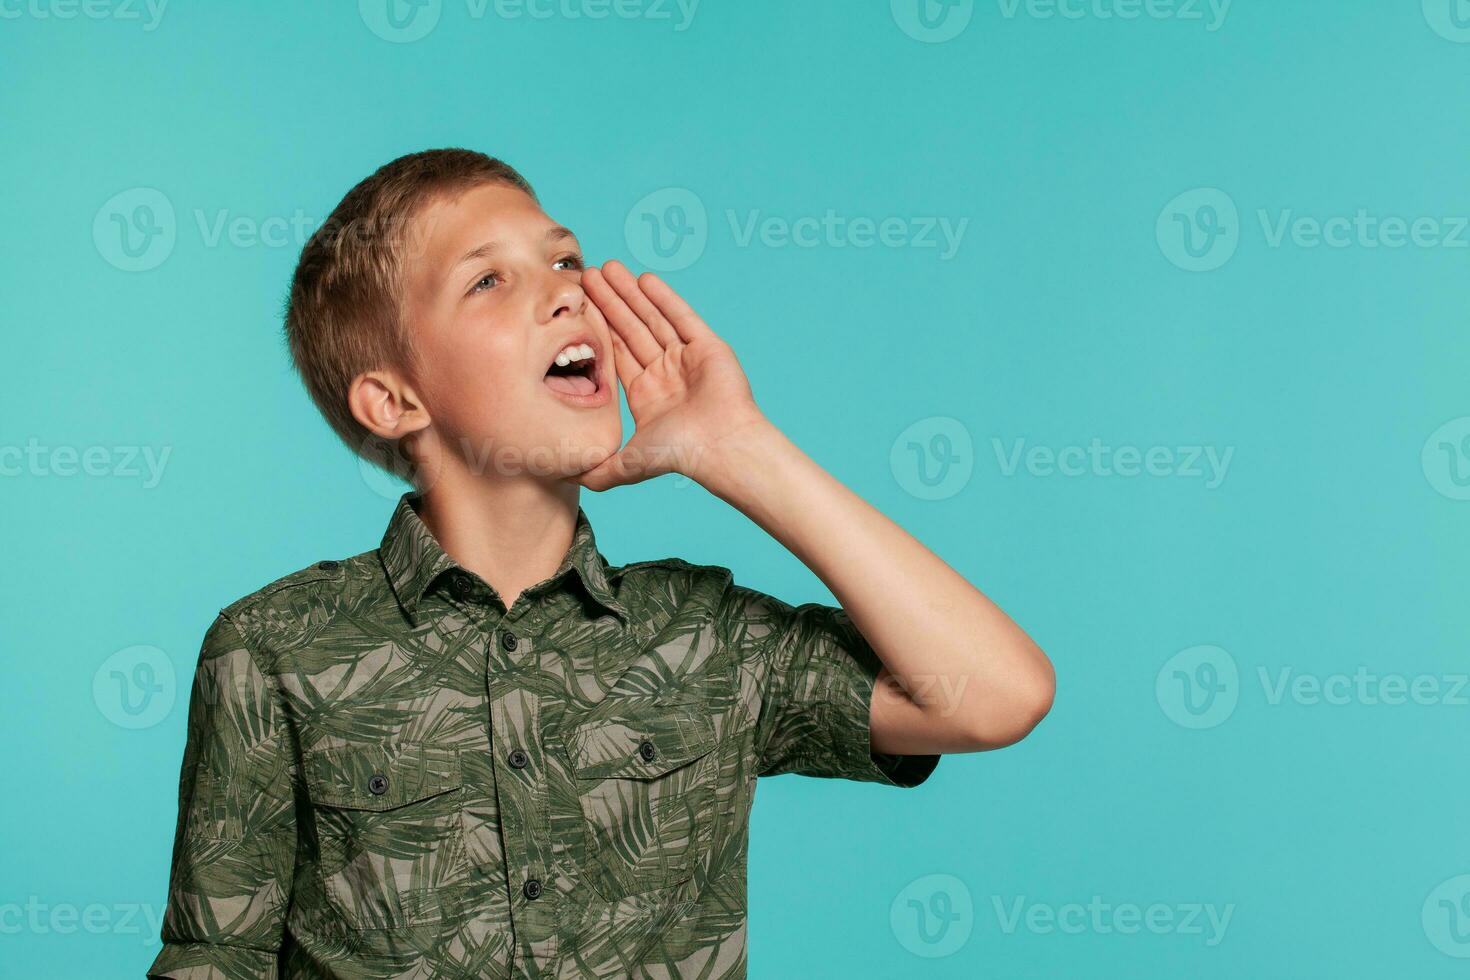 Close-up portrait of a blonde teenage boy in a green shirt with palm print posing against a blue studio background. Concept of sincere emotions. photo